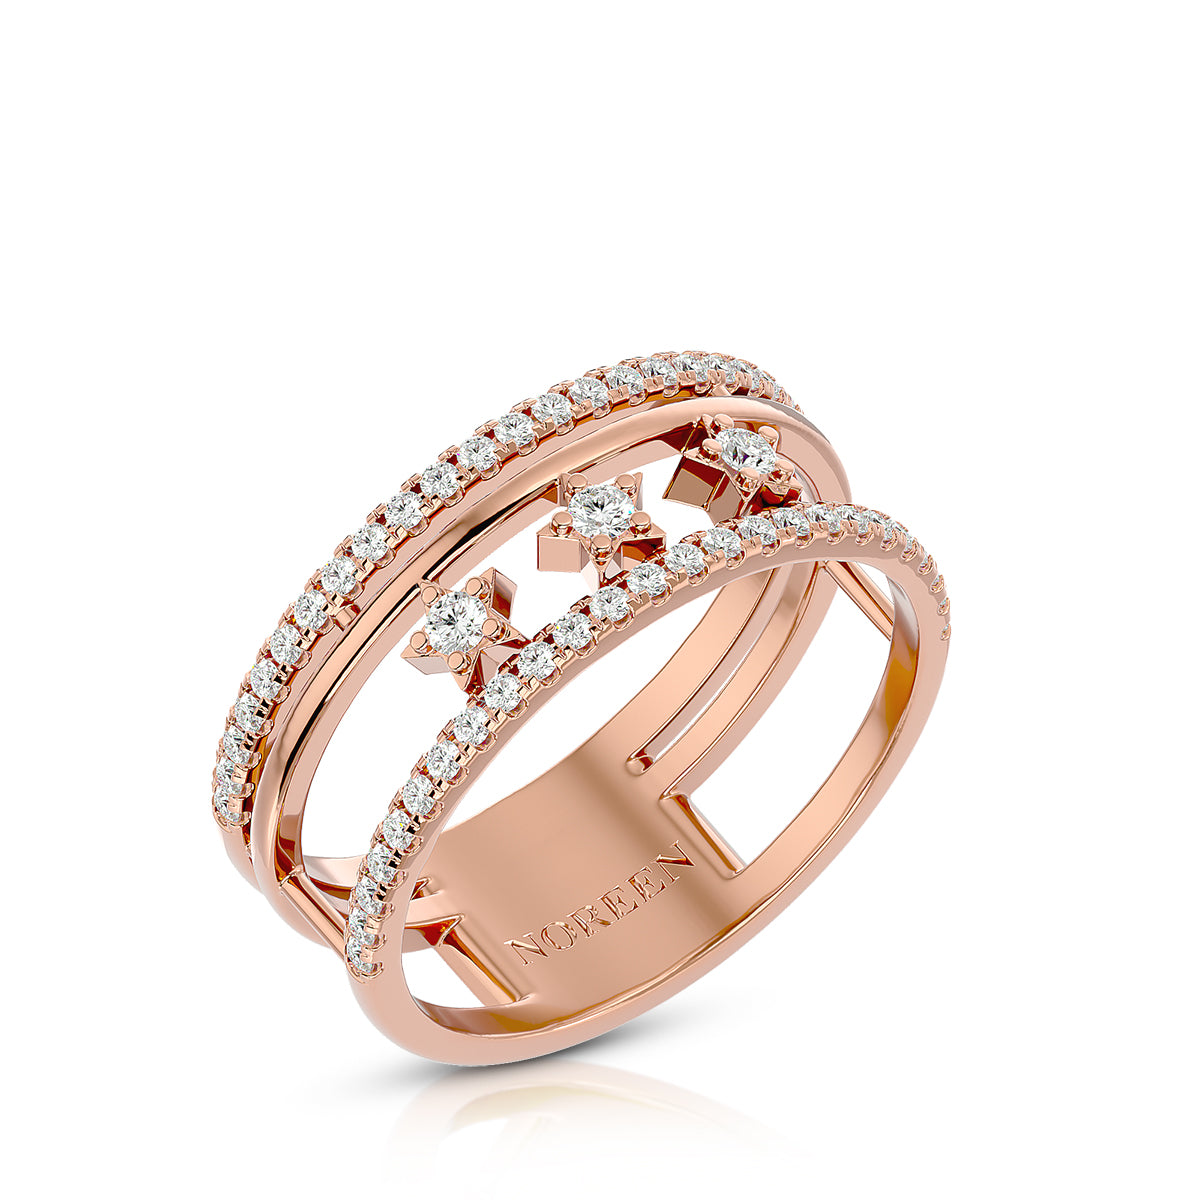 Energy Ring 18K Rose Gold with Diamonds